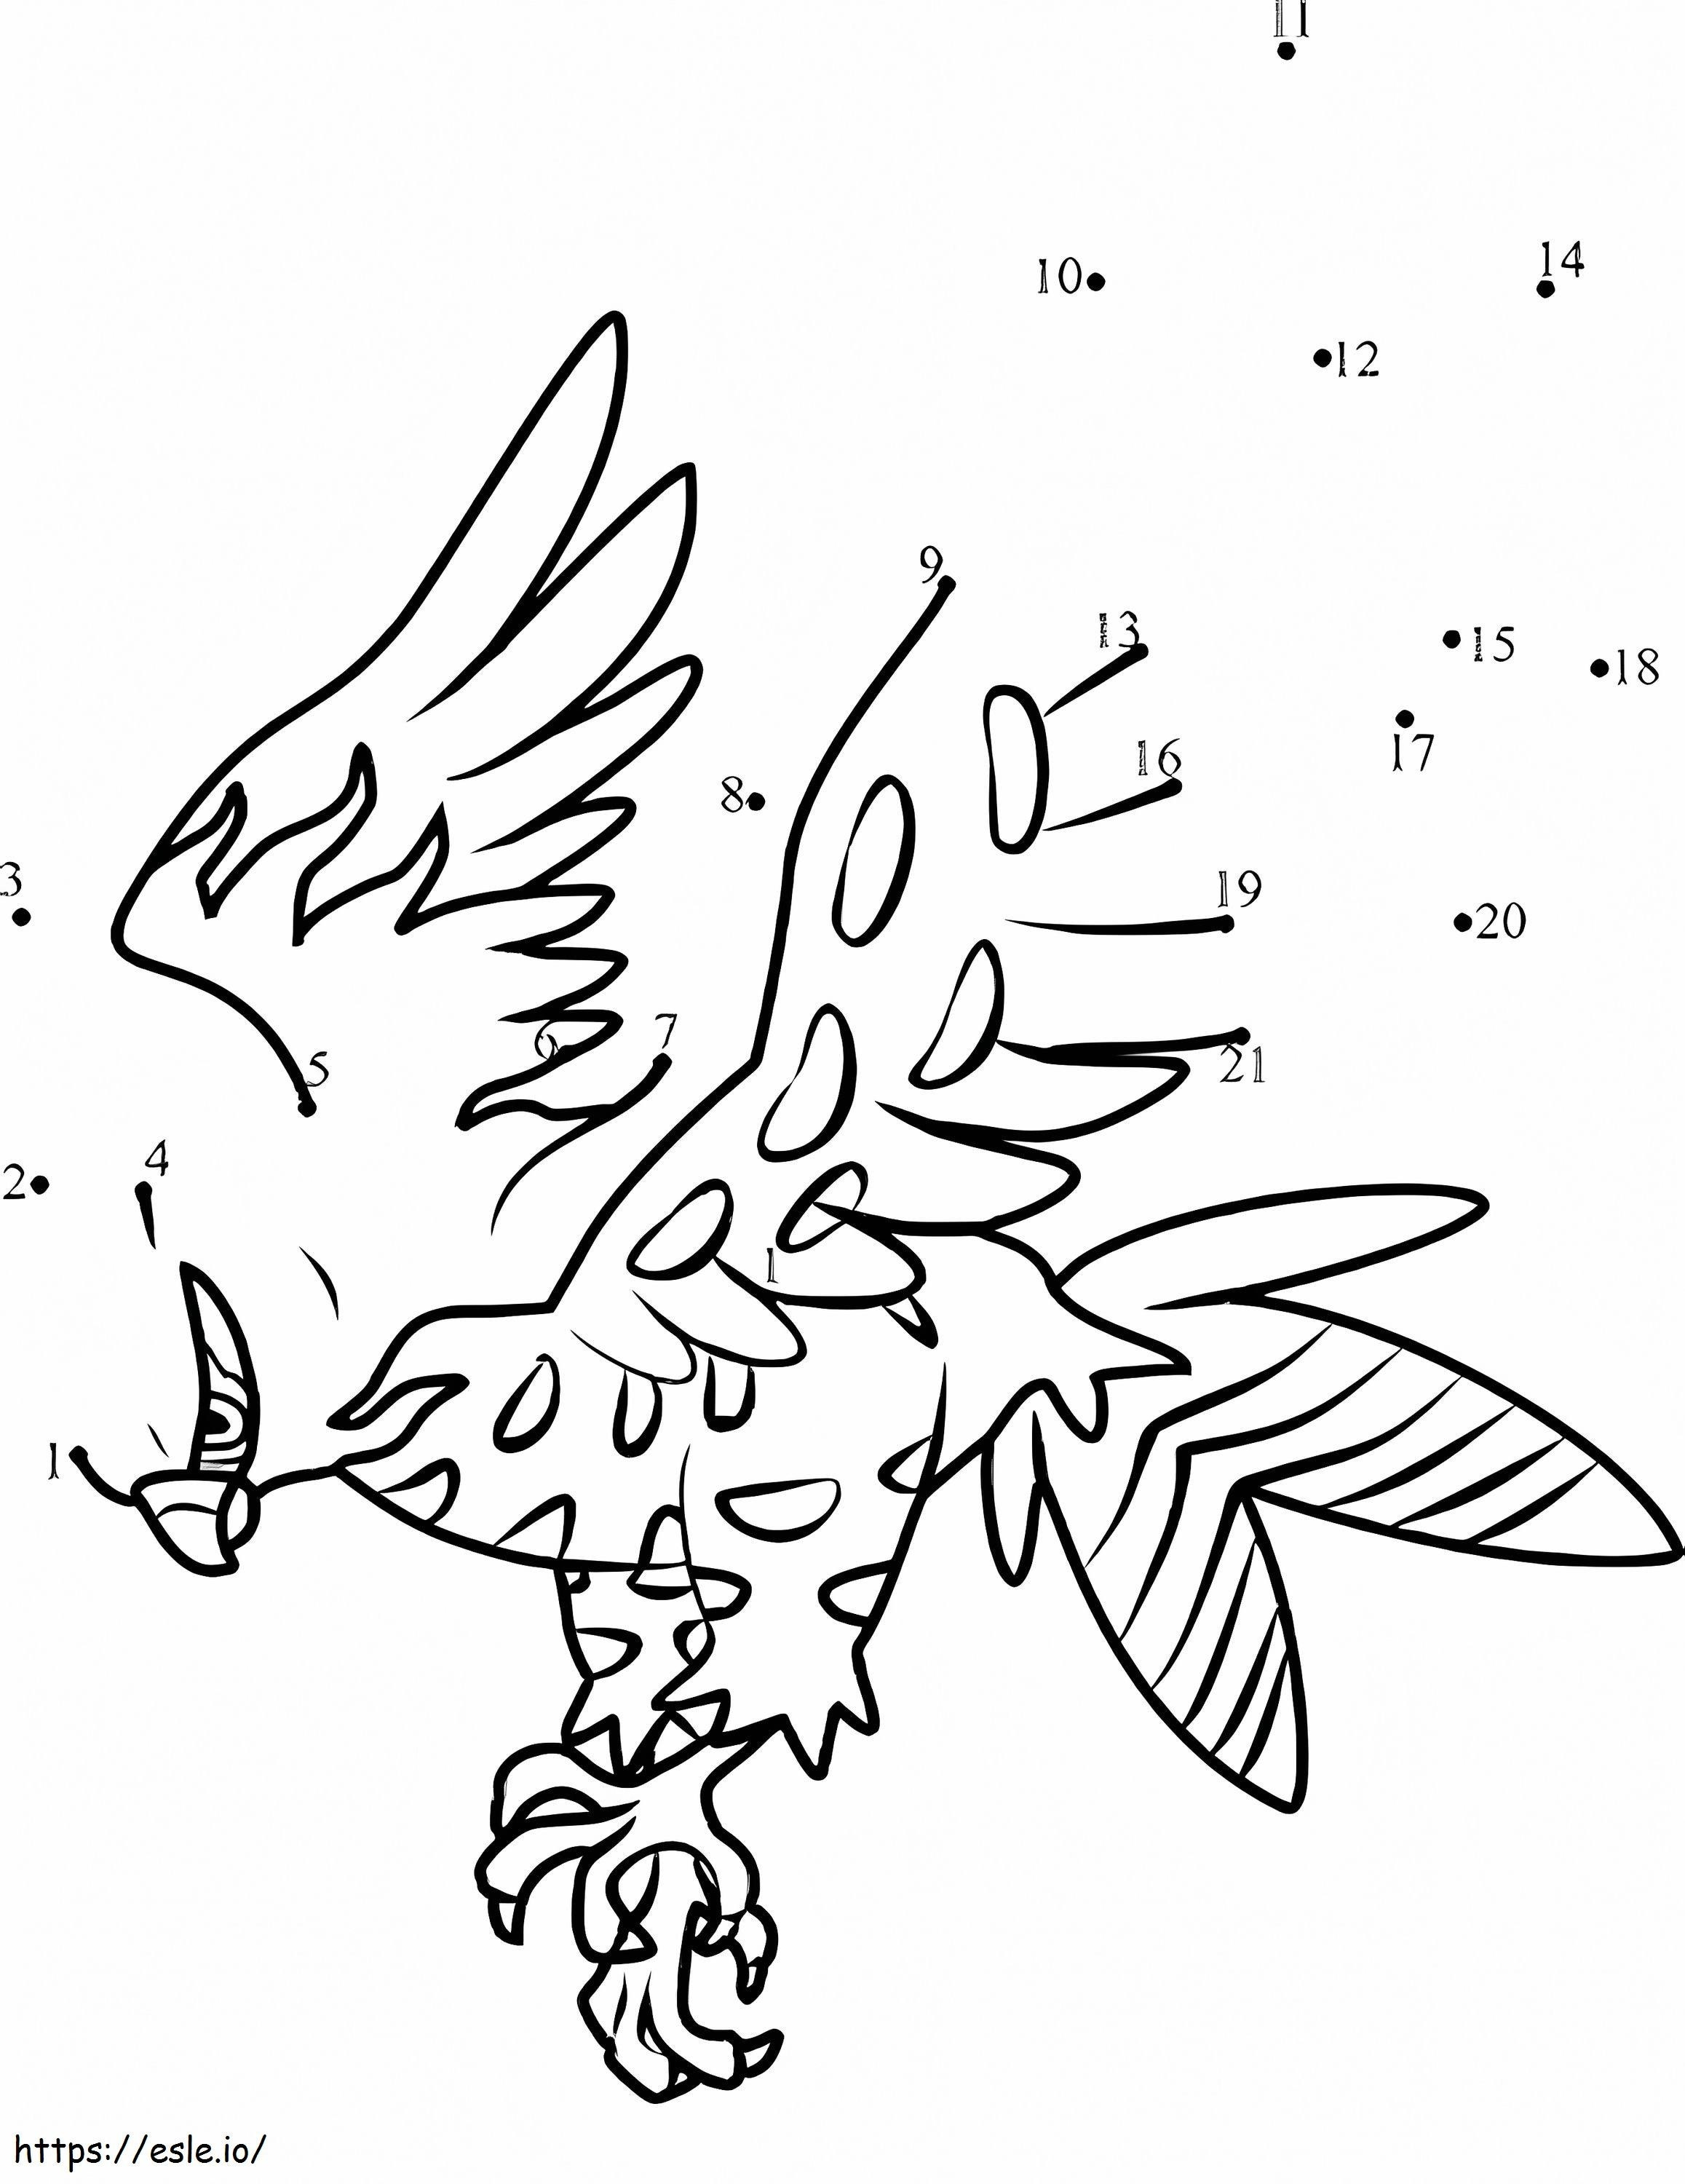 Talonflame Dot To Dot Coloring Page coloring page